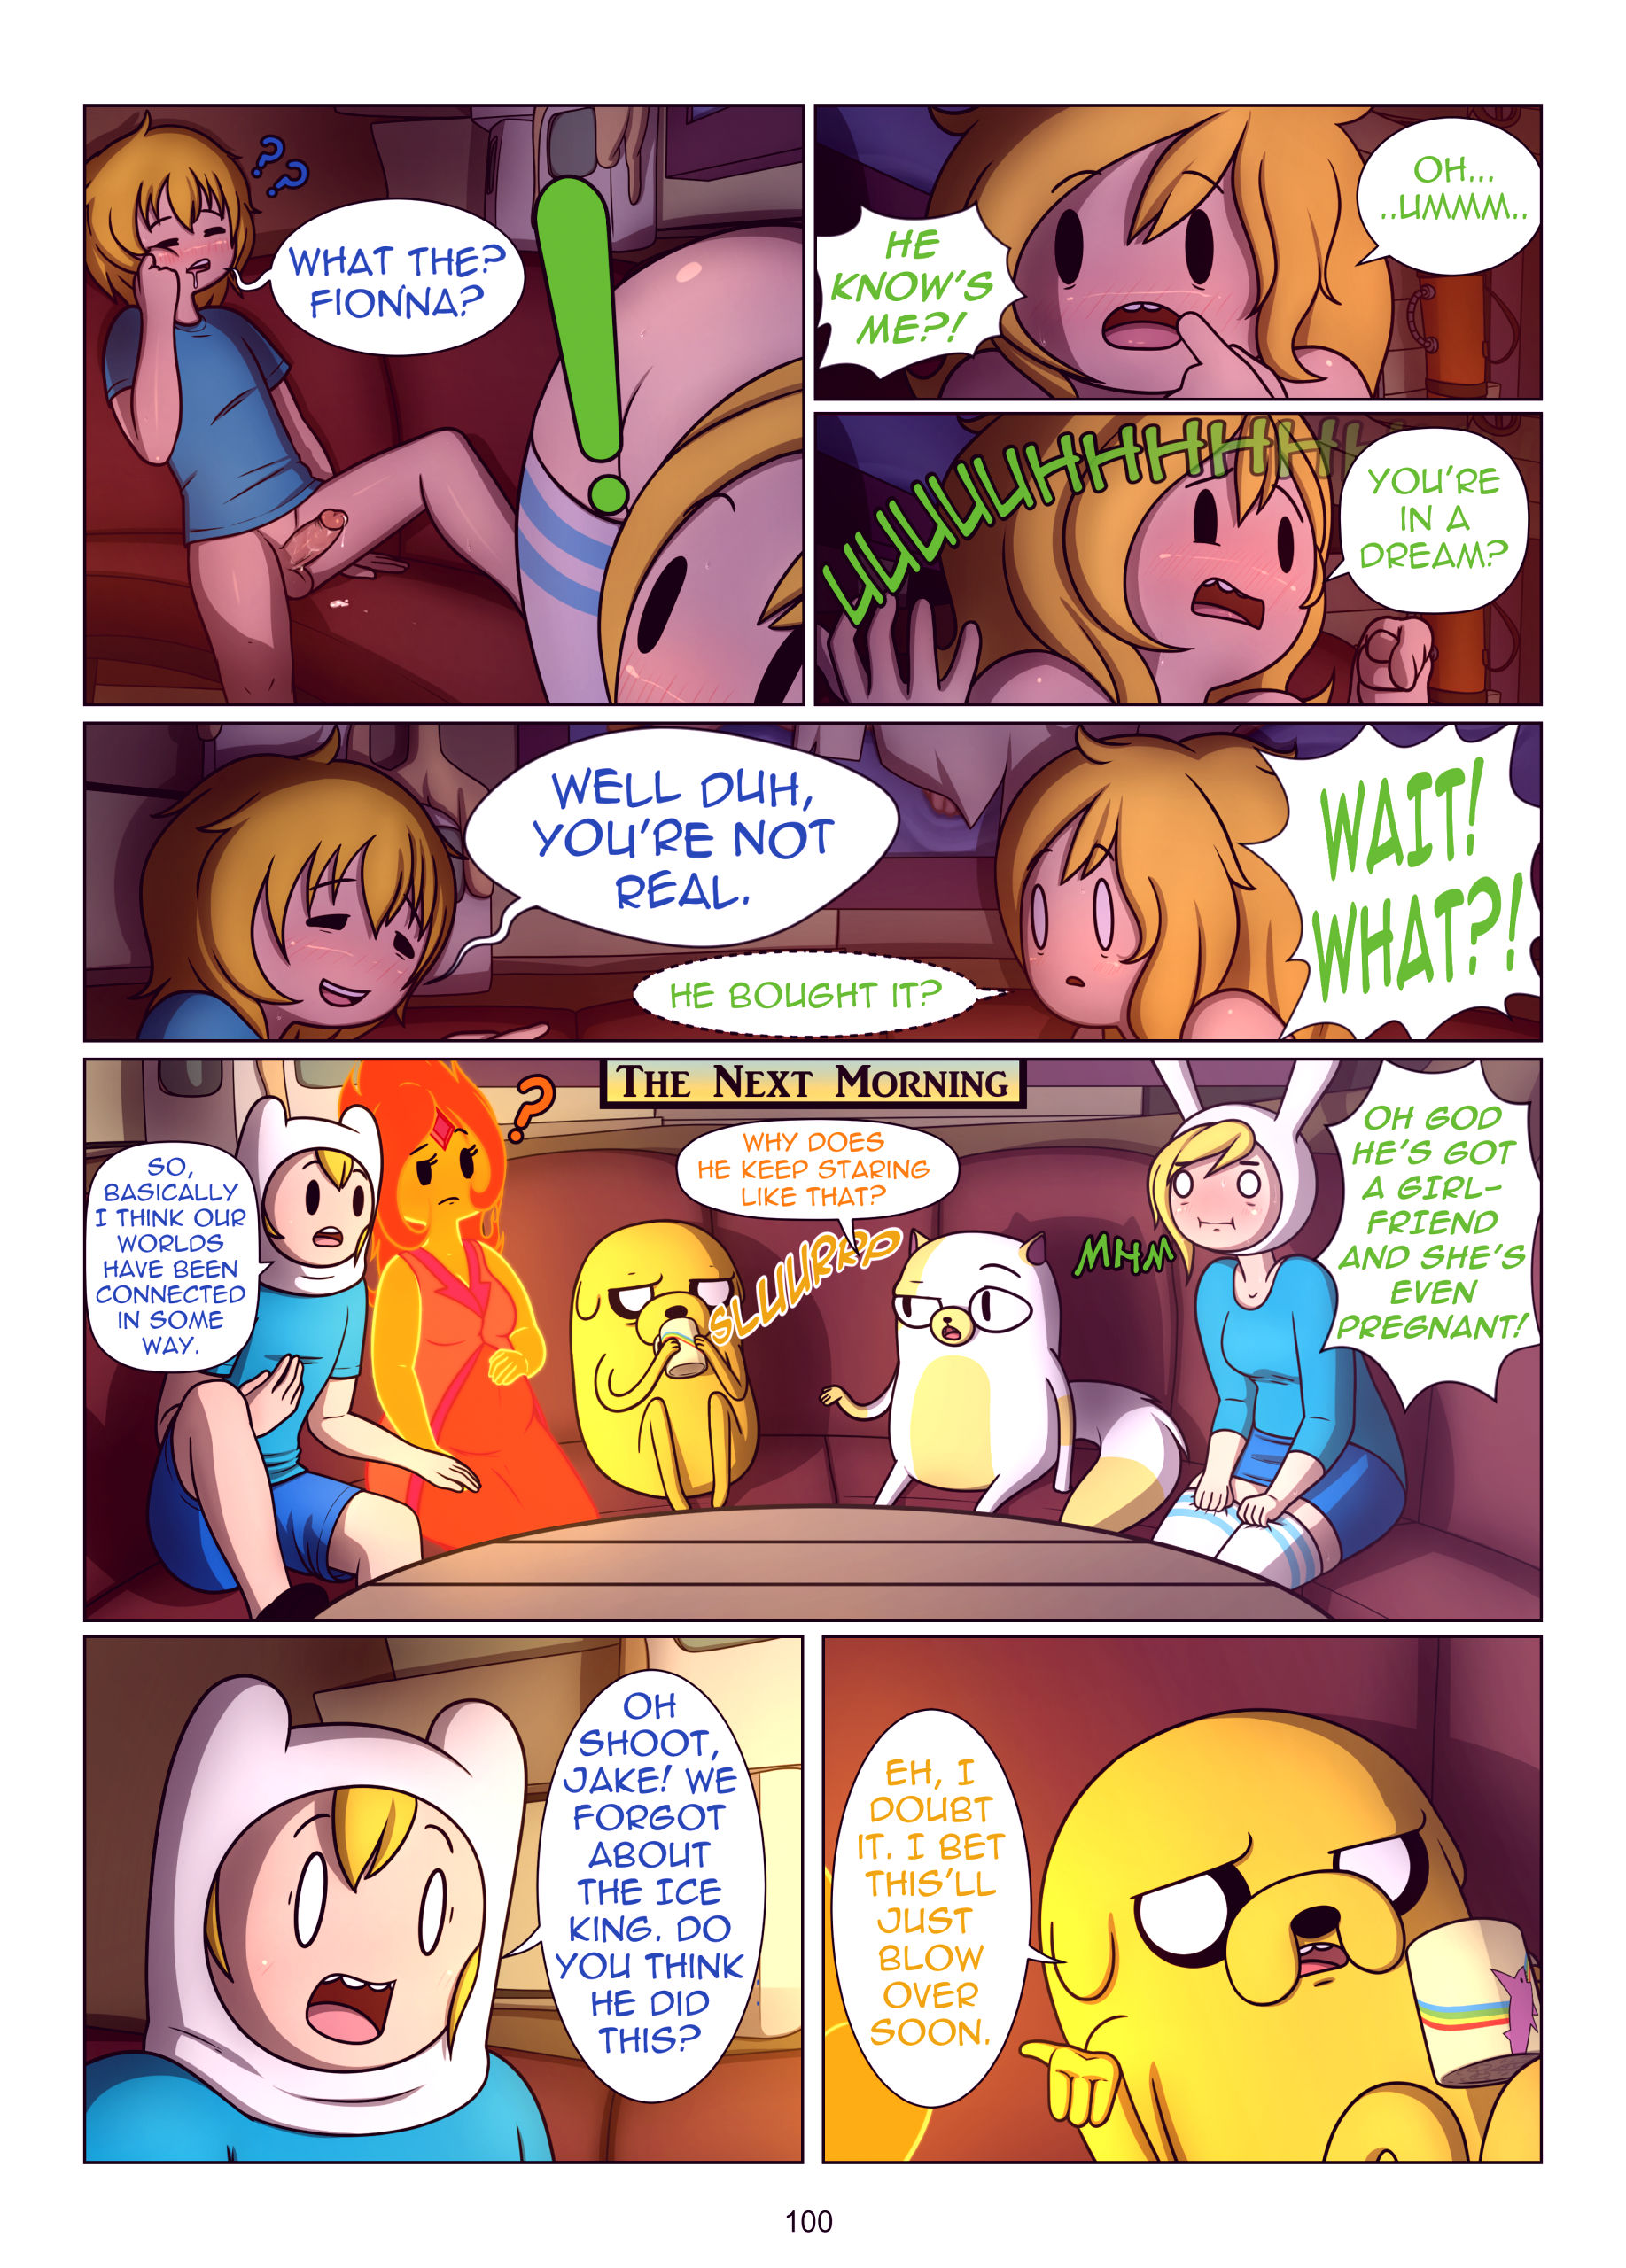 Misadventure time the collection porn comic picture 101